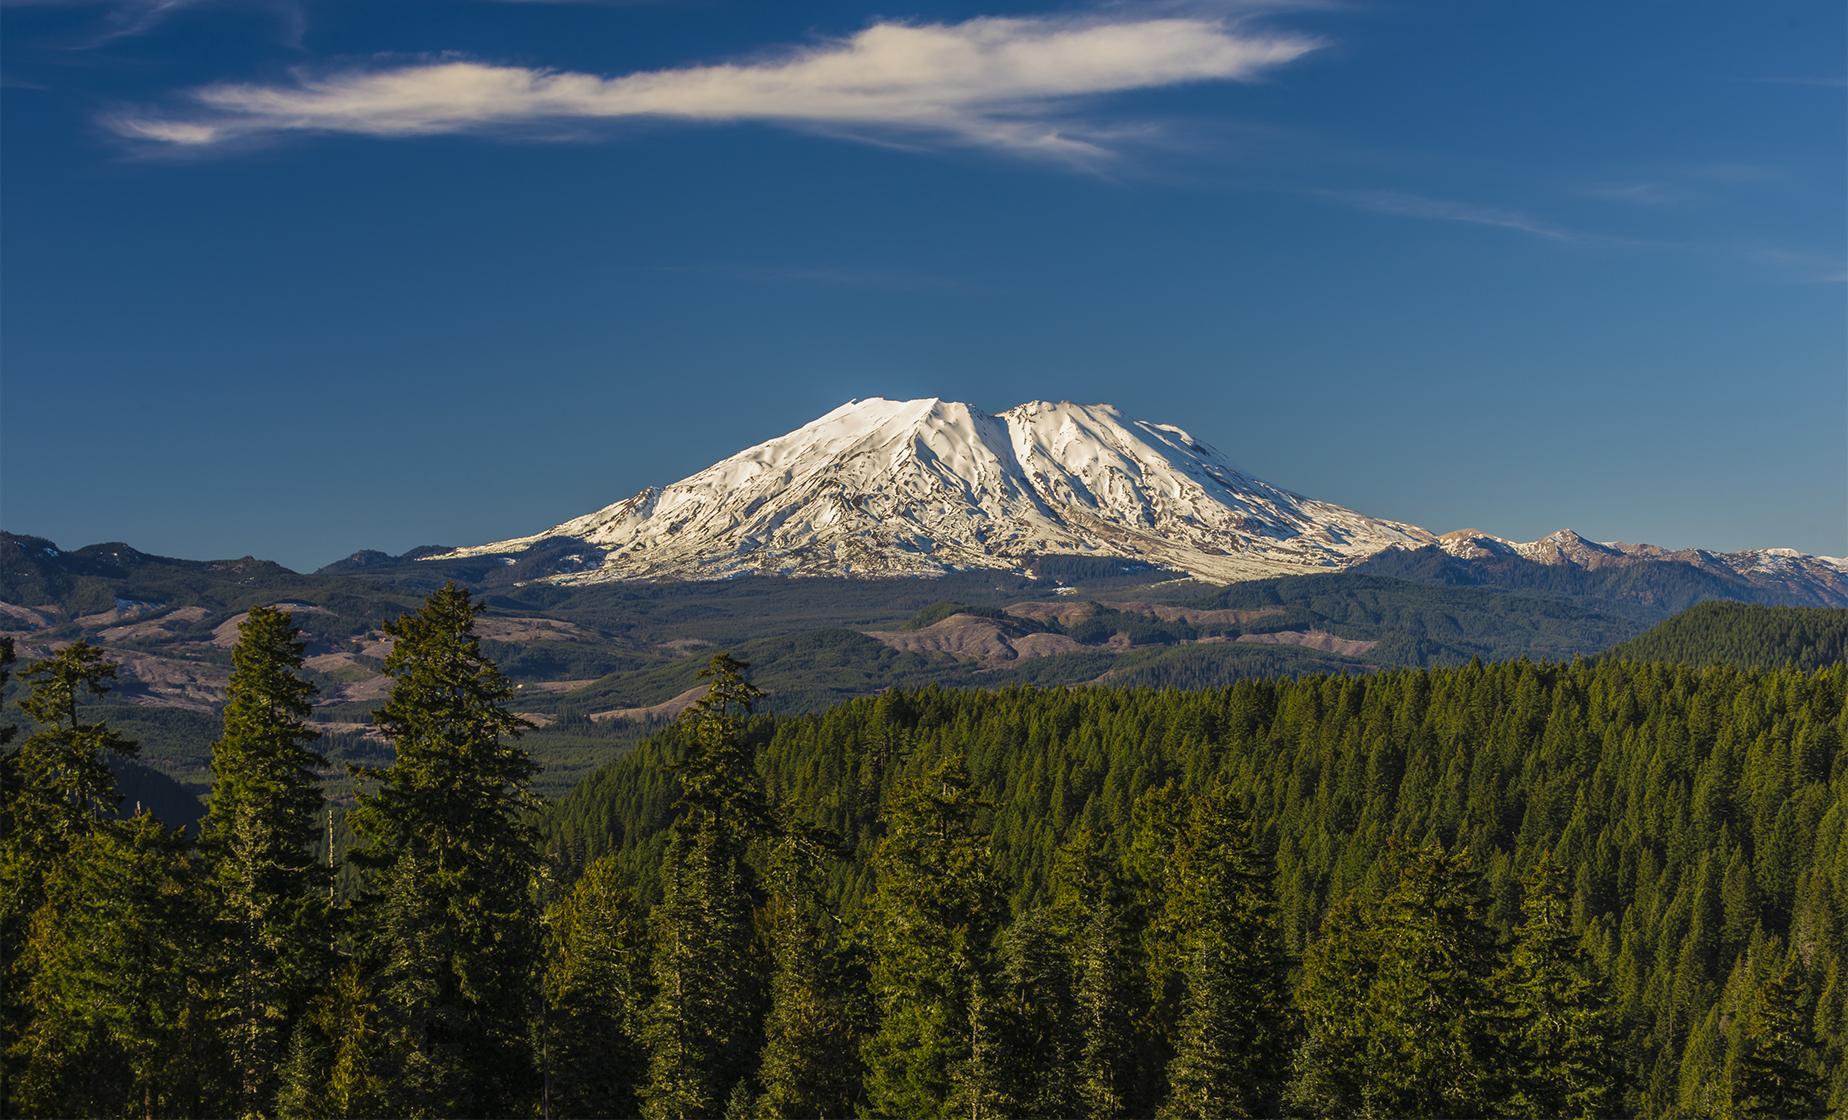 Mount St. Helens Small Group Tour Excursion from Seattle (Full Day)